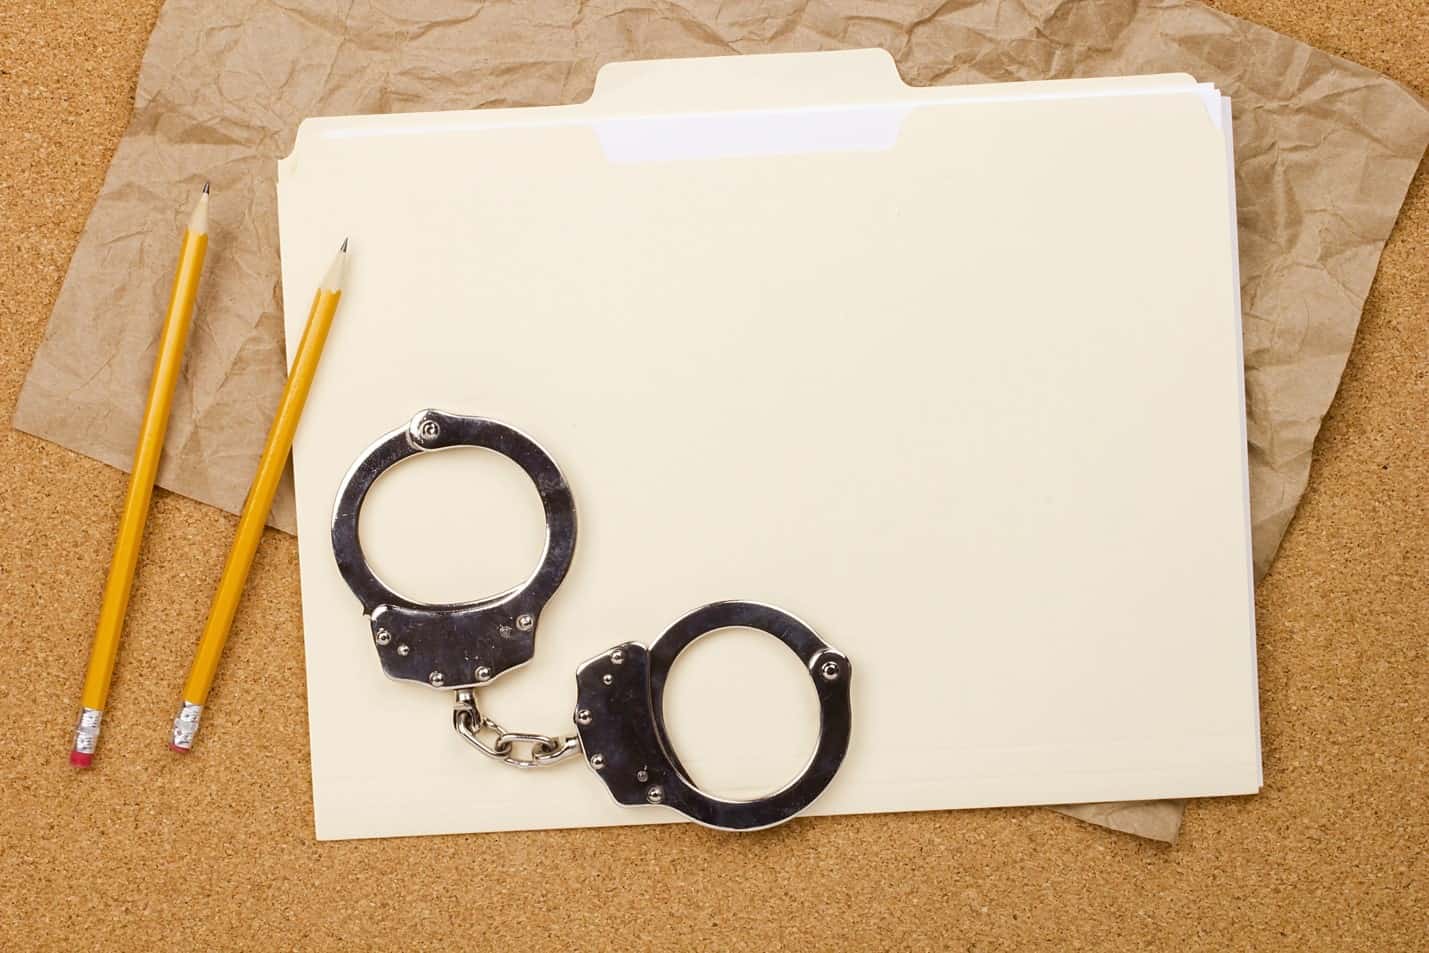 6 Things to Know About Sealing Your Criminal Record